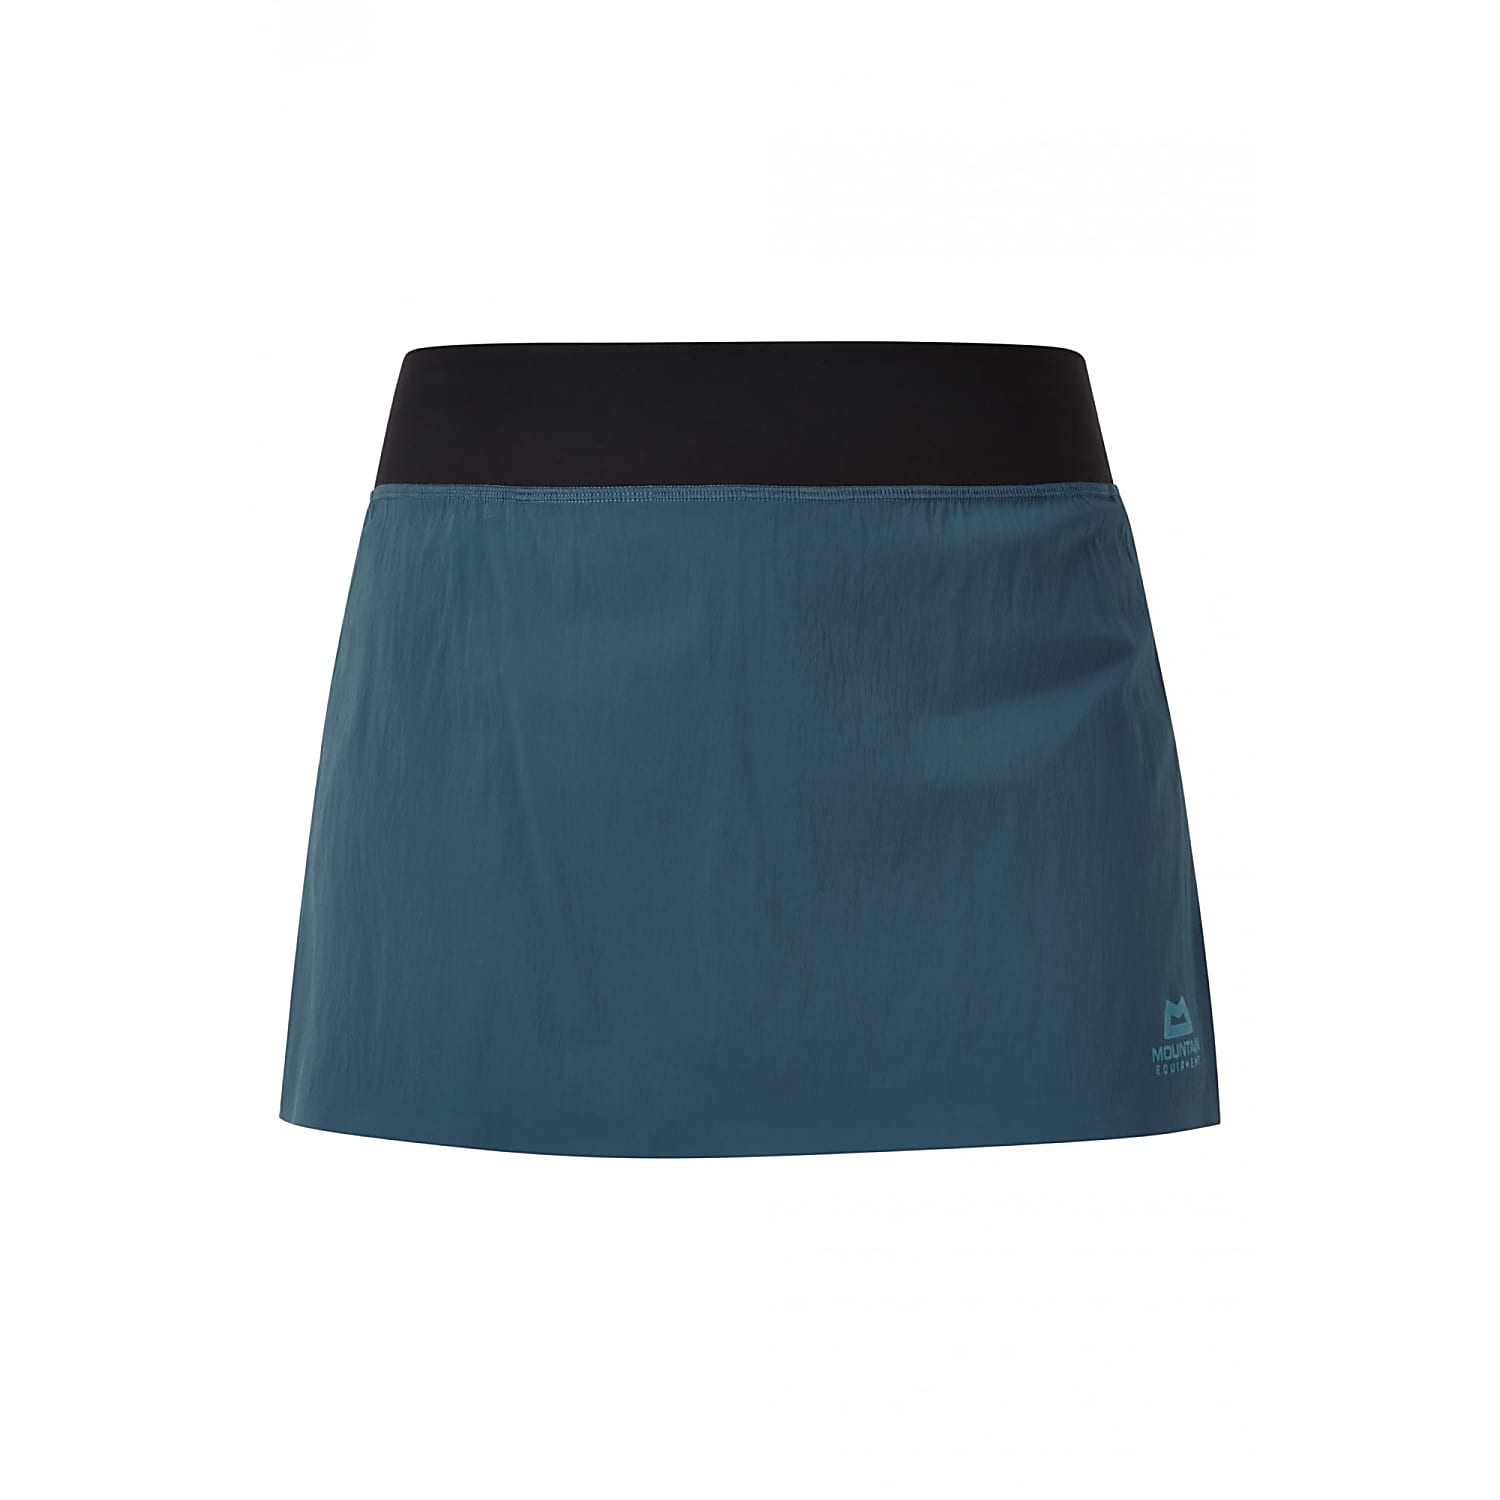 W Blue FRENEY Fast and Mountain Equipment cheap Majolica shipping - SKORT,